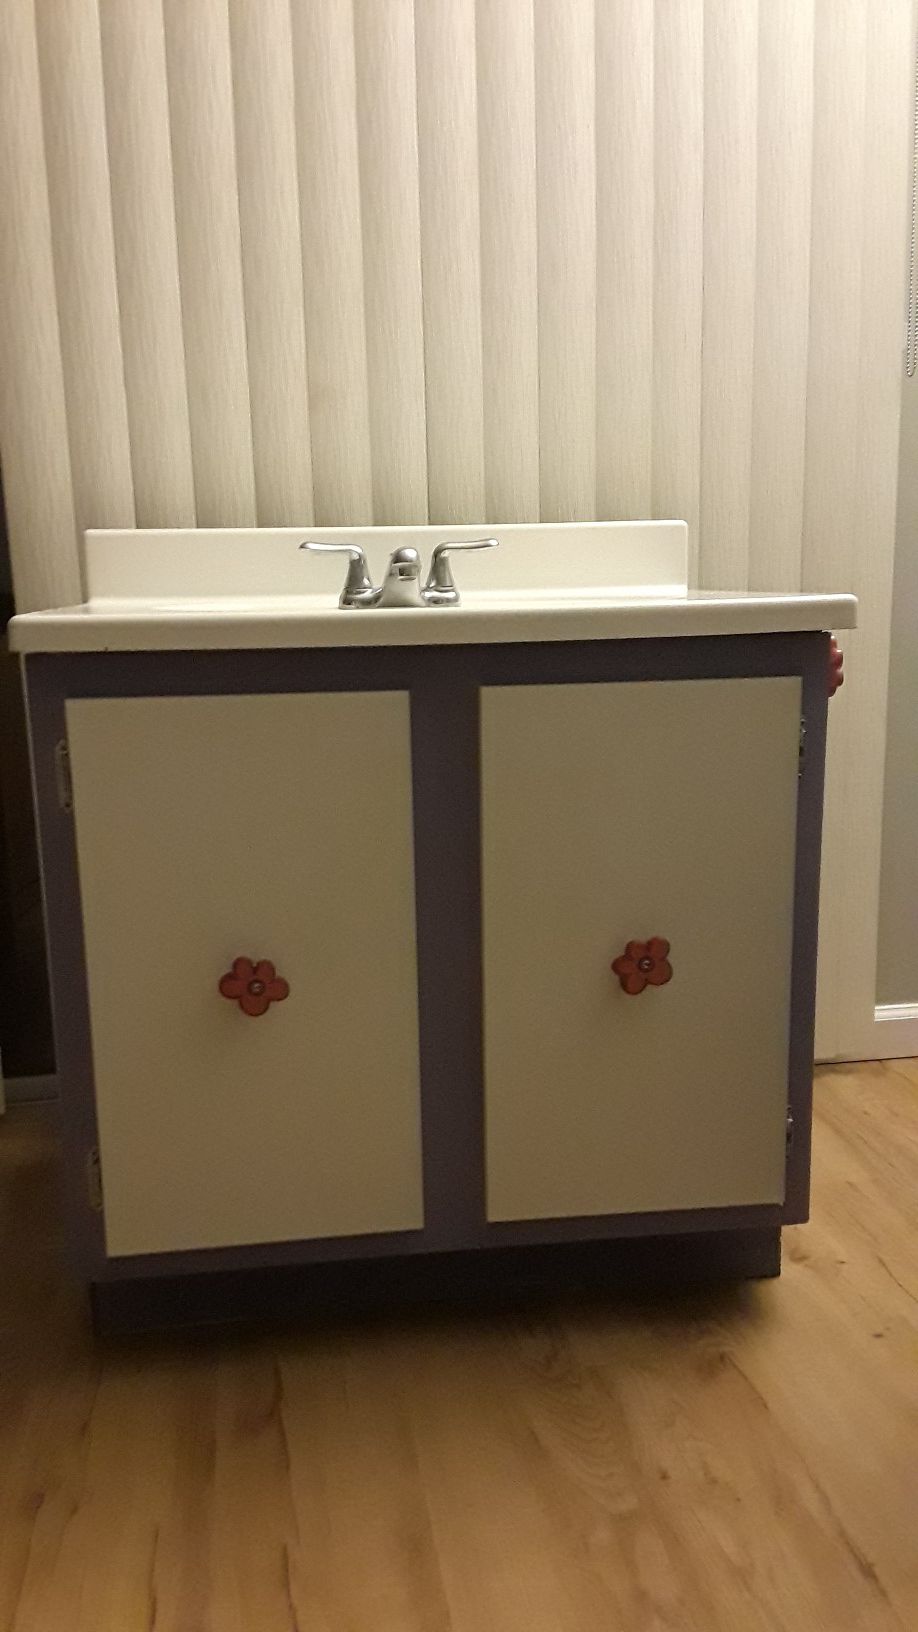 Bathroom cabinet with sink and faucet